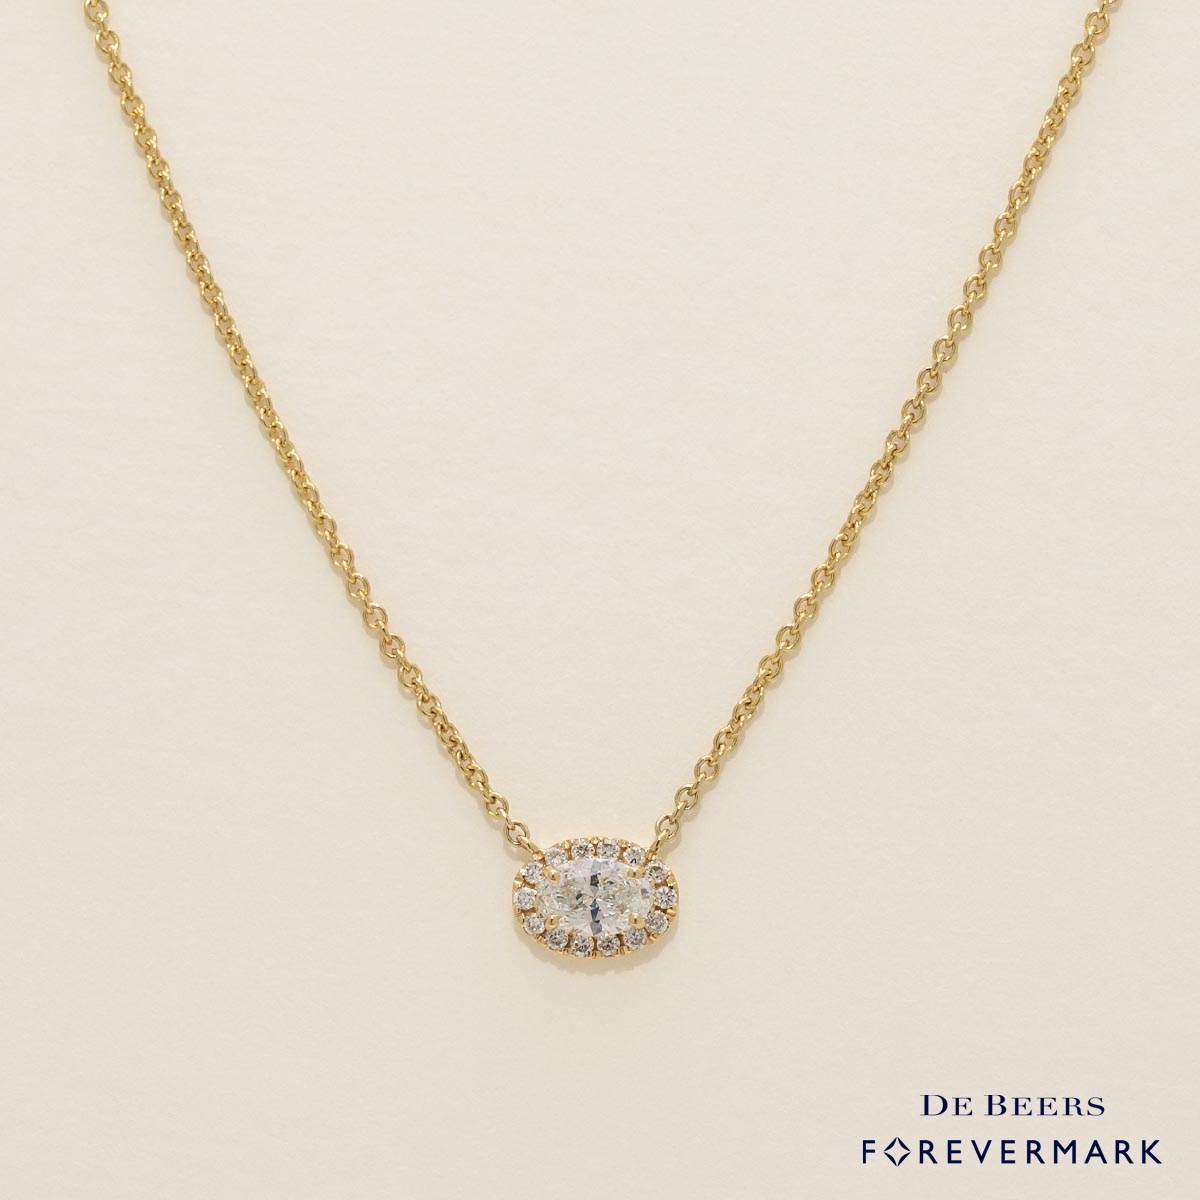 De Beers Forevermark Oval Diamond Halo Necklace in 18kt Yellow Gold (1/3ct tw)